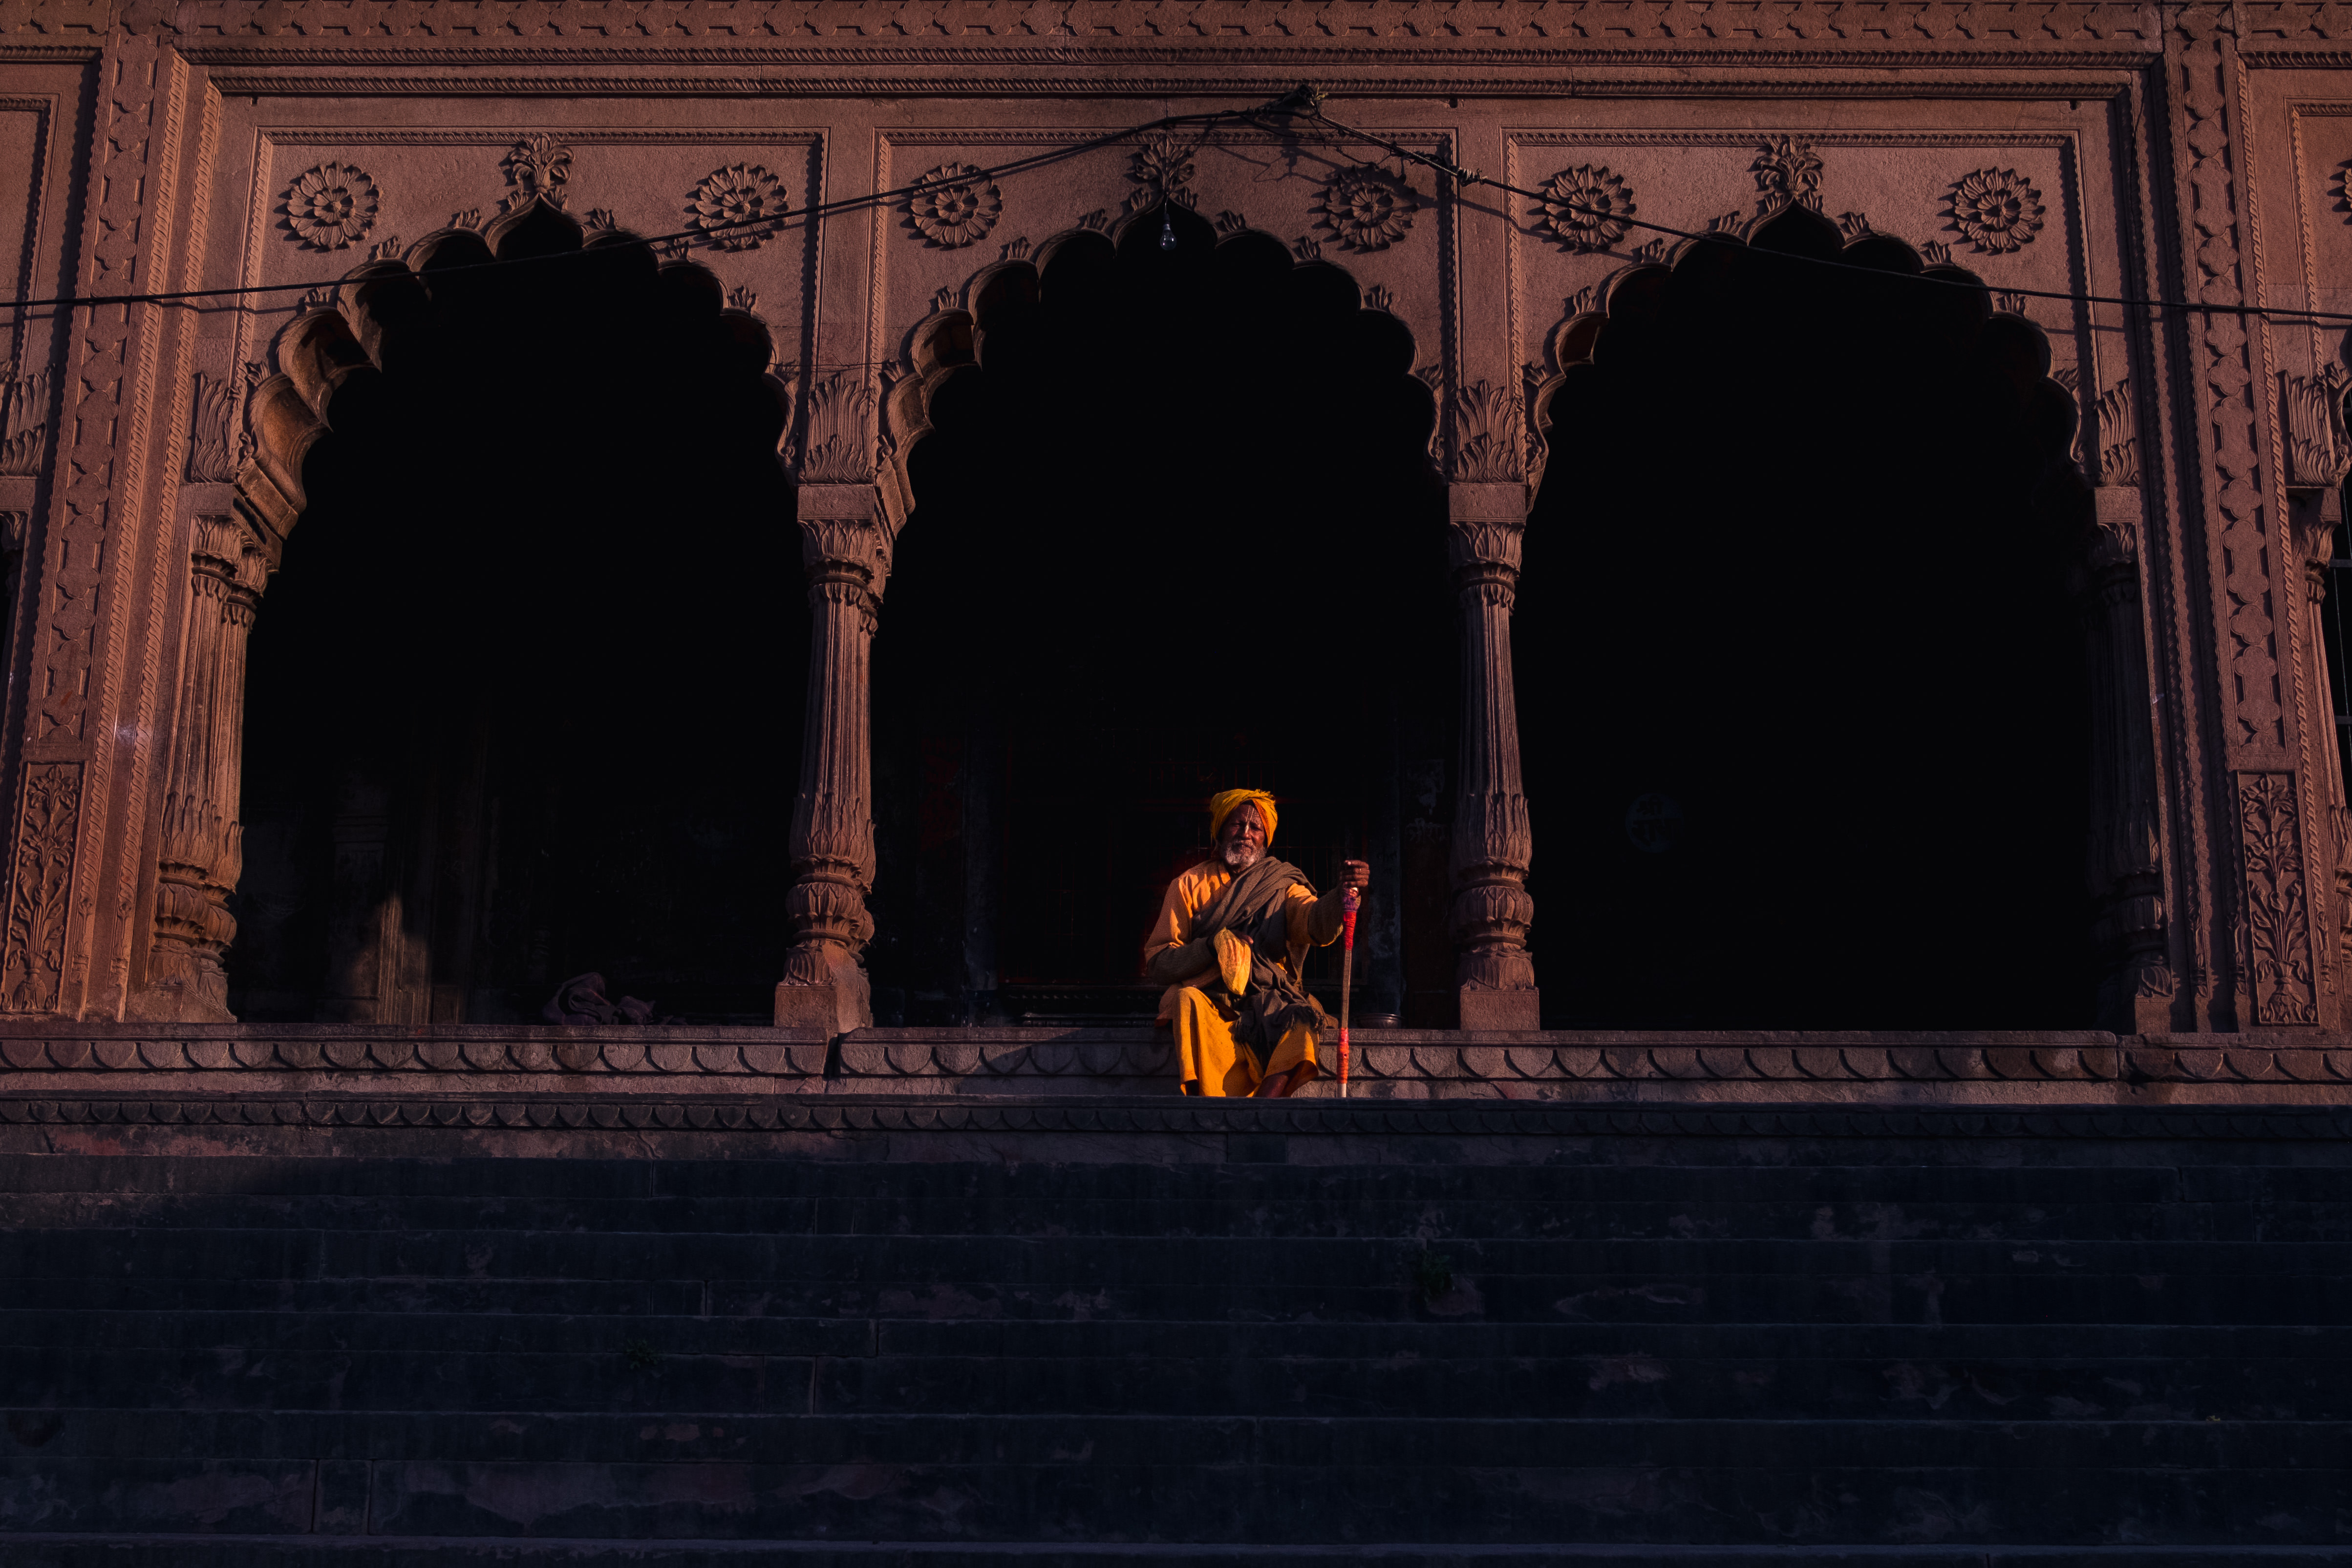 India Street Photography During Holi Festival. lone priest sits among the light. Images by Jason Vinson